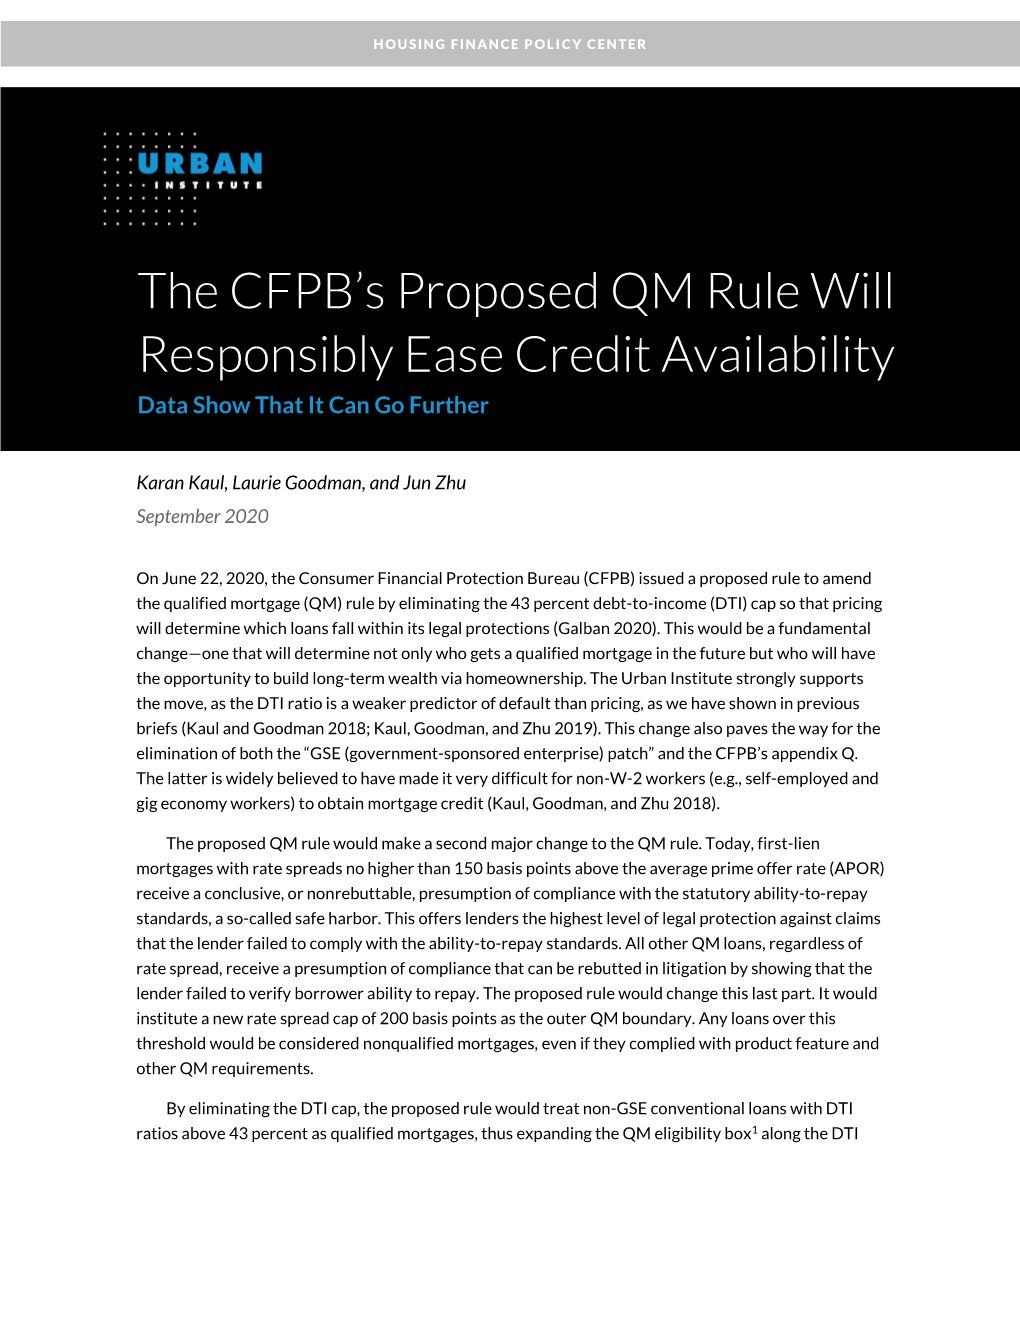 The CFPB's Proposed QM Rule Will Responsibly Ease Credit